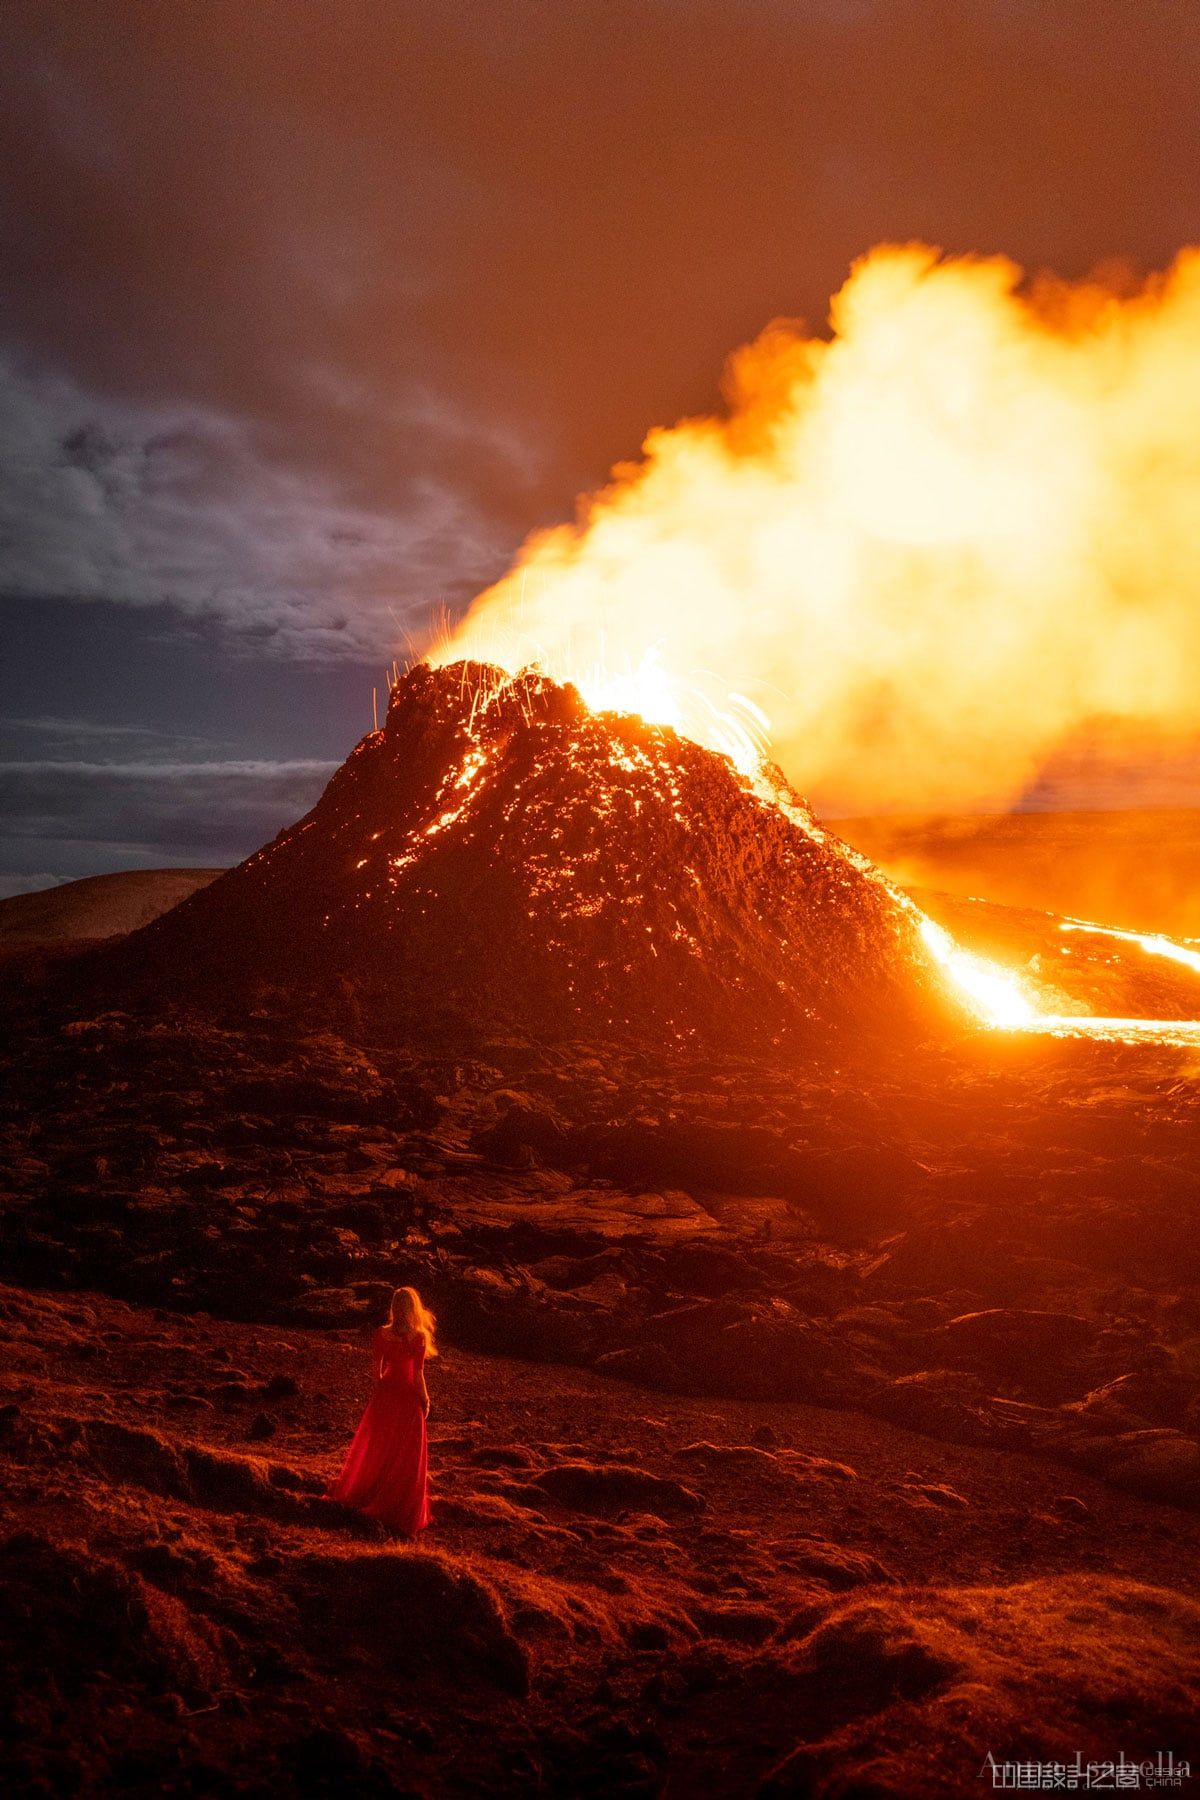 Portrait of a Woman Next to Erupting Volcano in Iceland